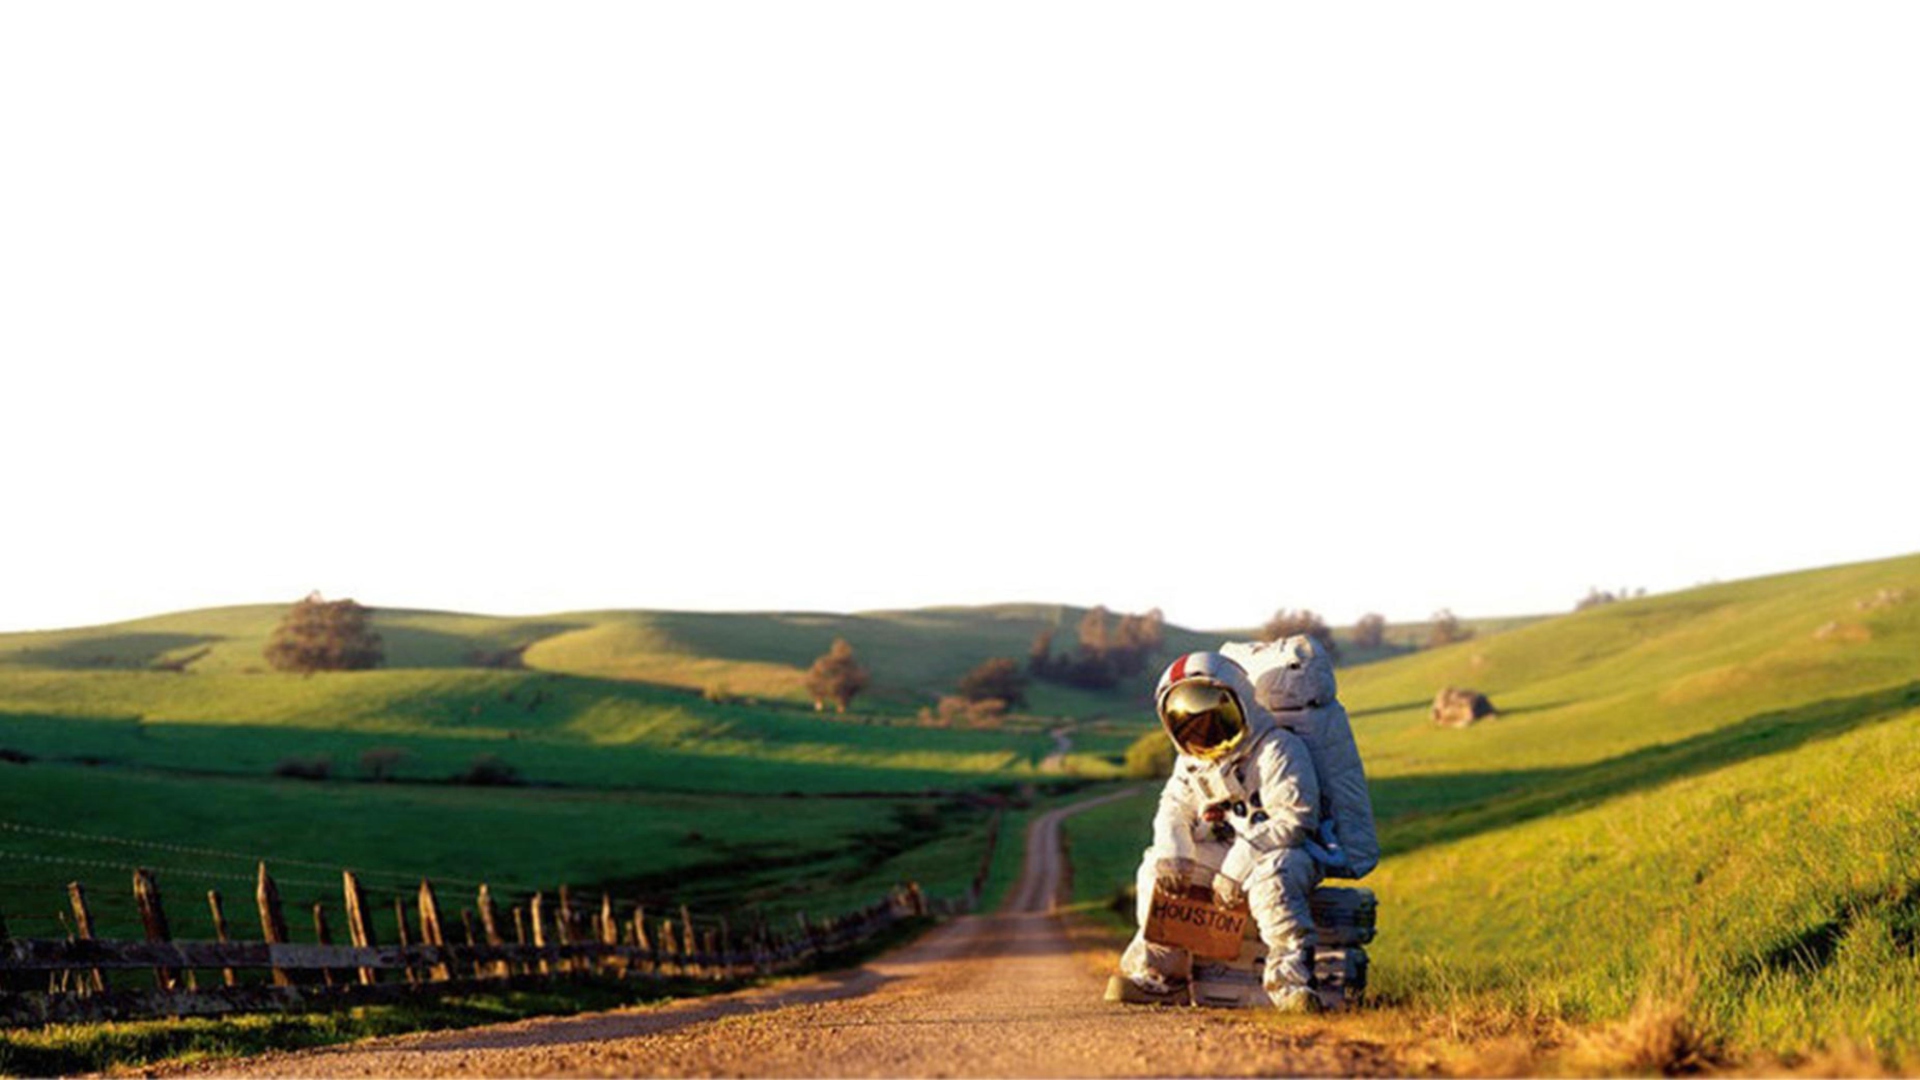 Astronaut On The Road wallpaper 1920x1080